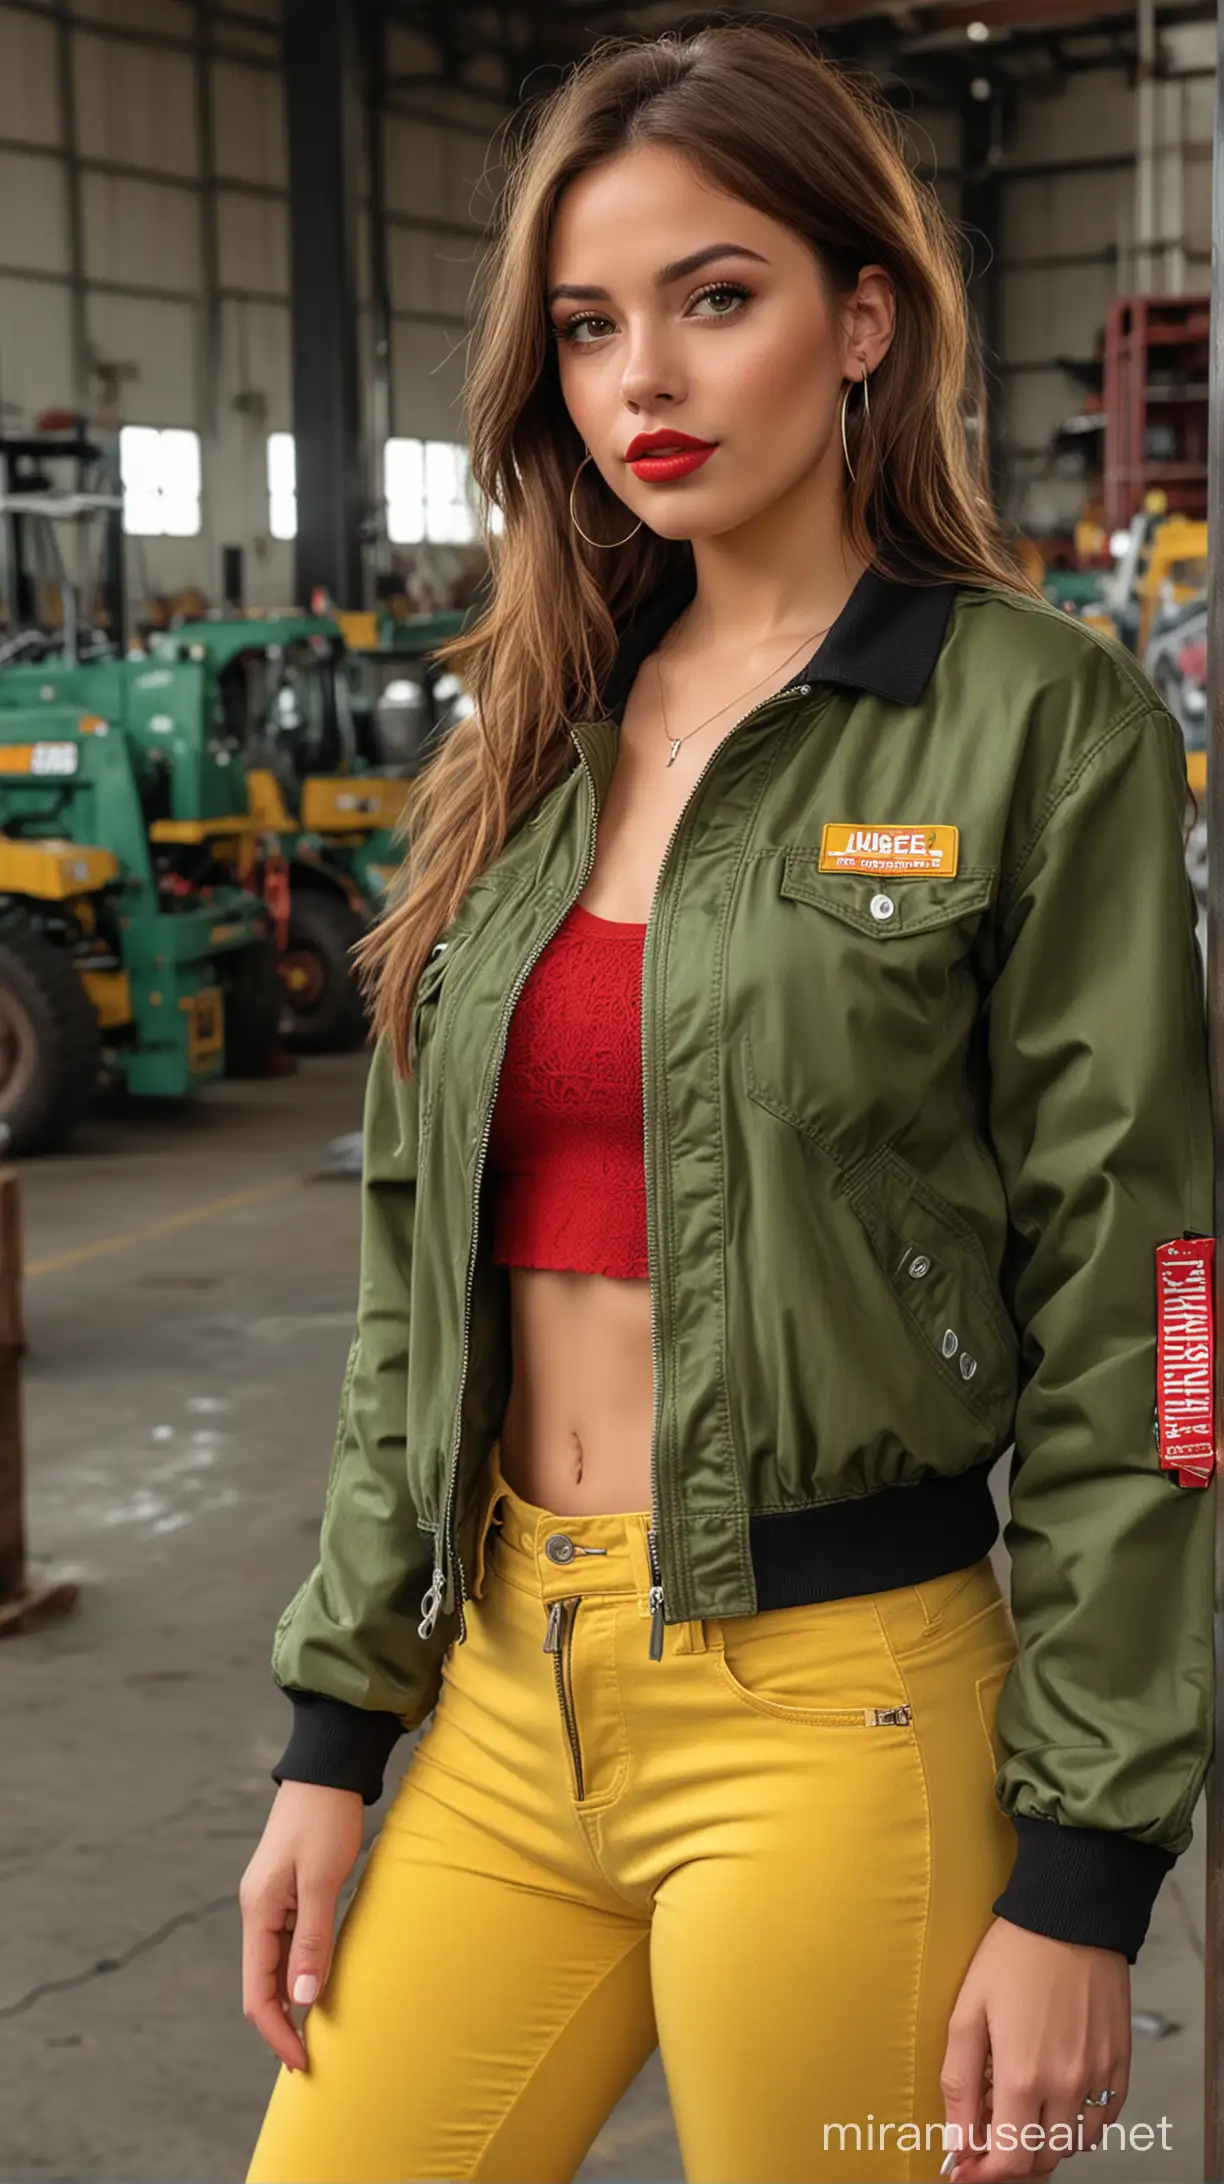 4k Ai art beautiful USA girl brown hair red lipstick ear tops nose ring yellow trousers and green zipper jacket in usa steel factory